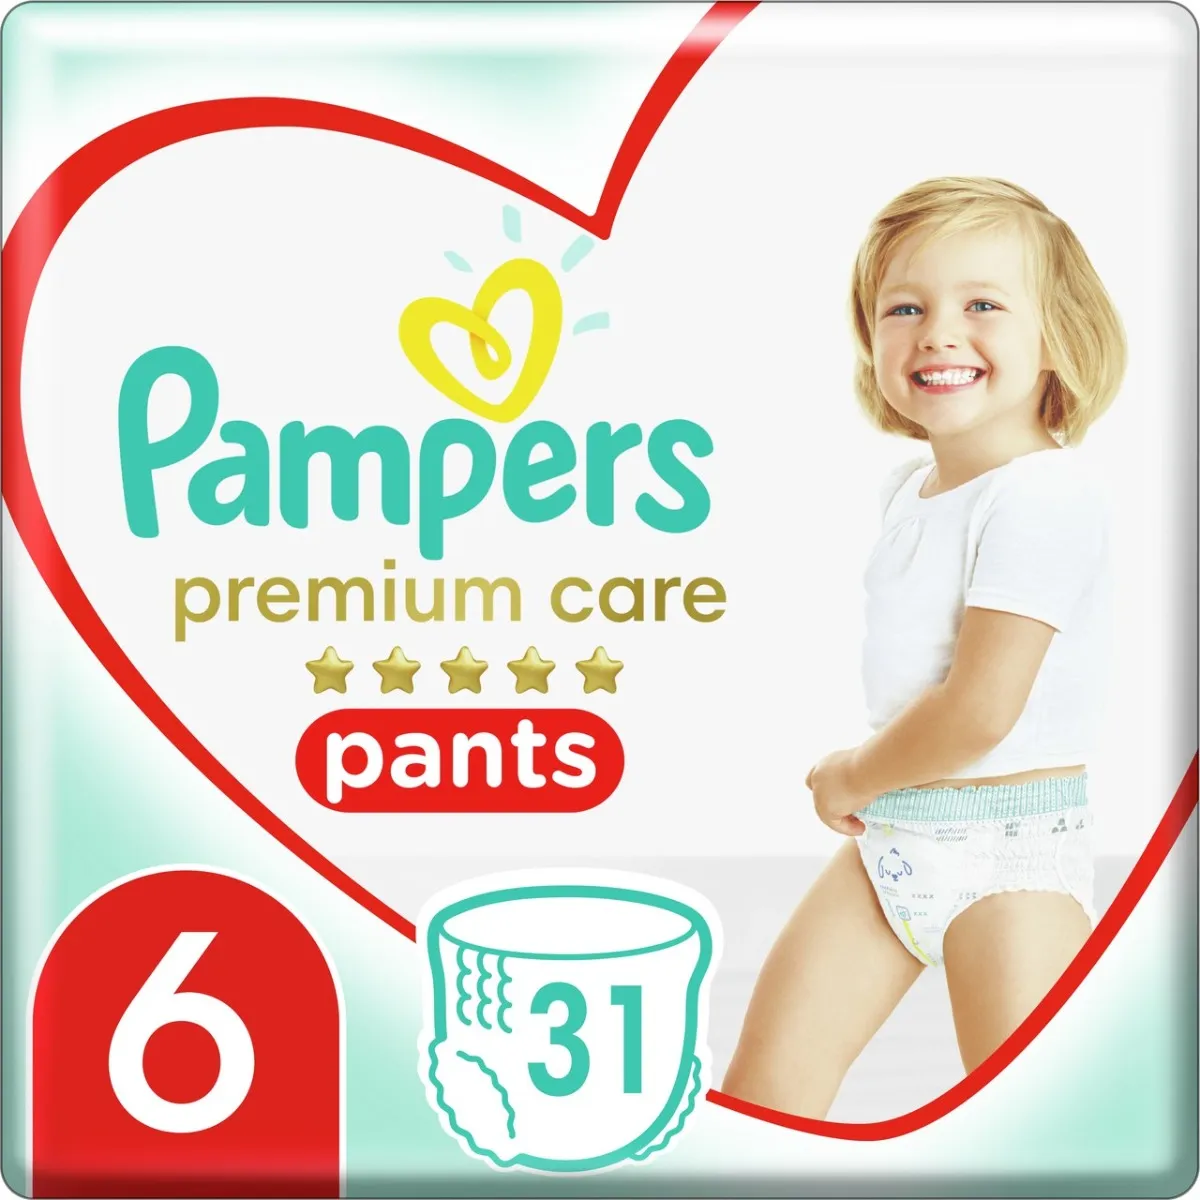 tesco pampers 7